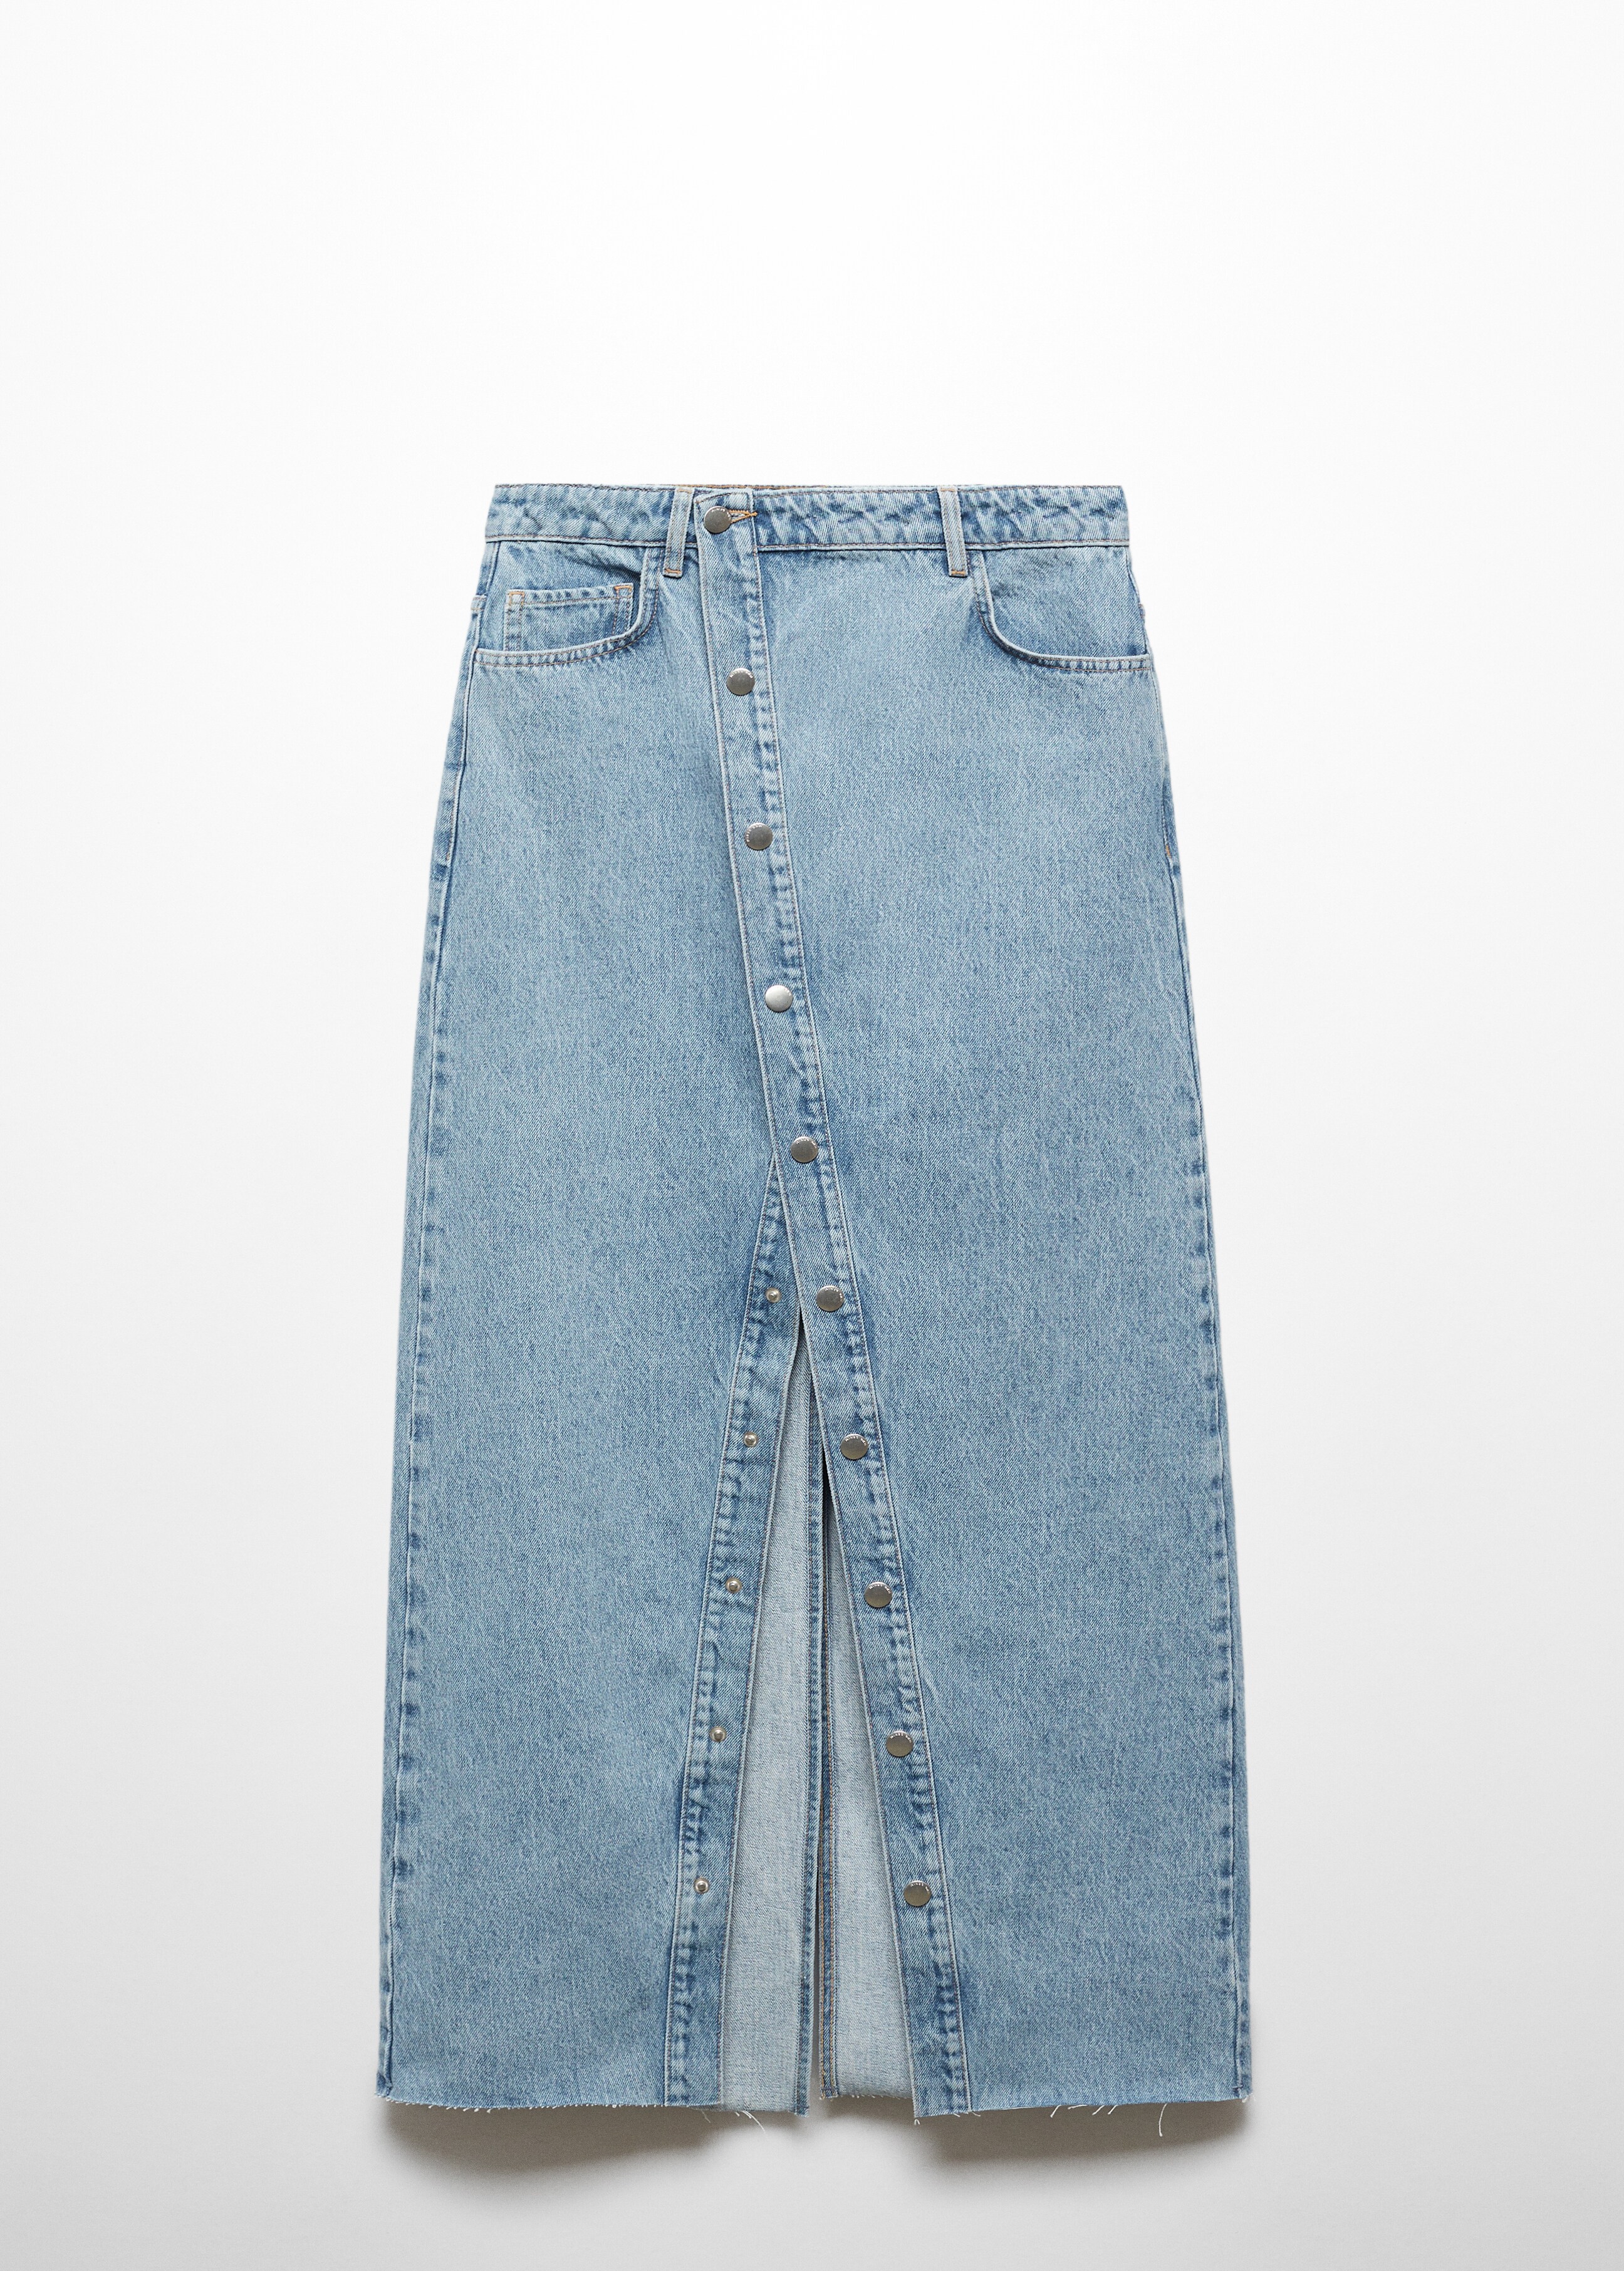 Denim skirt with buttons - Article without model